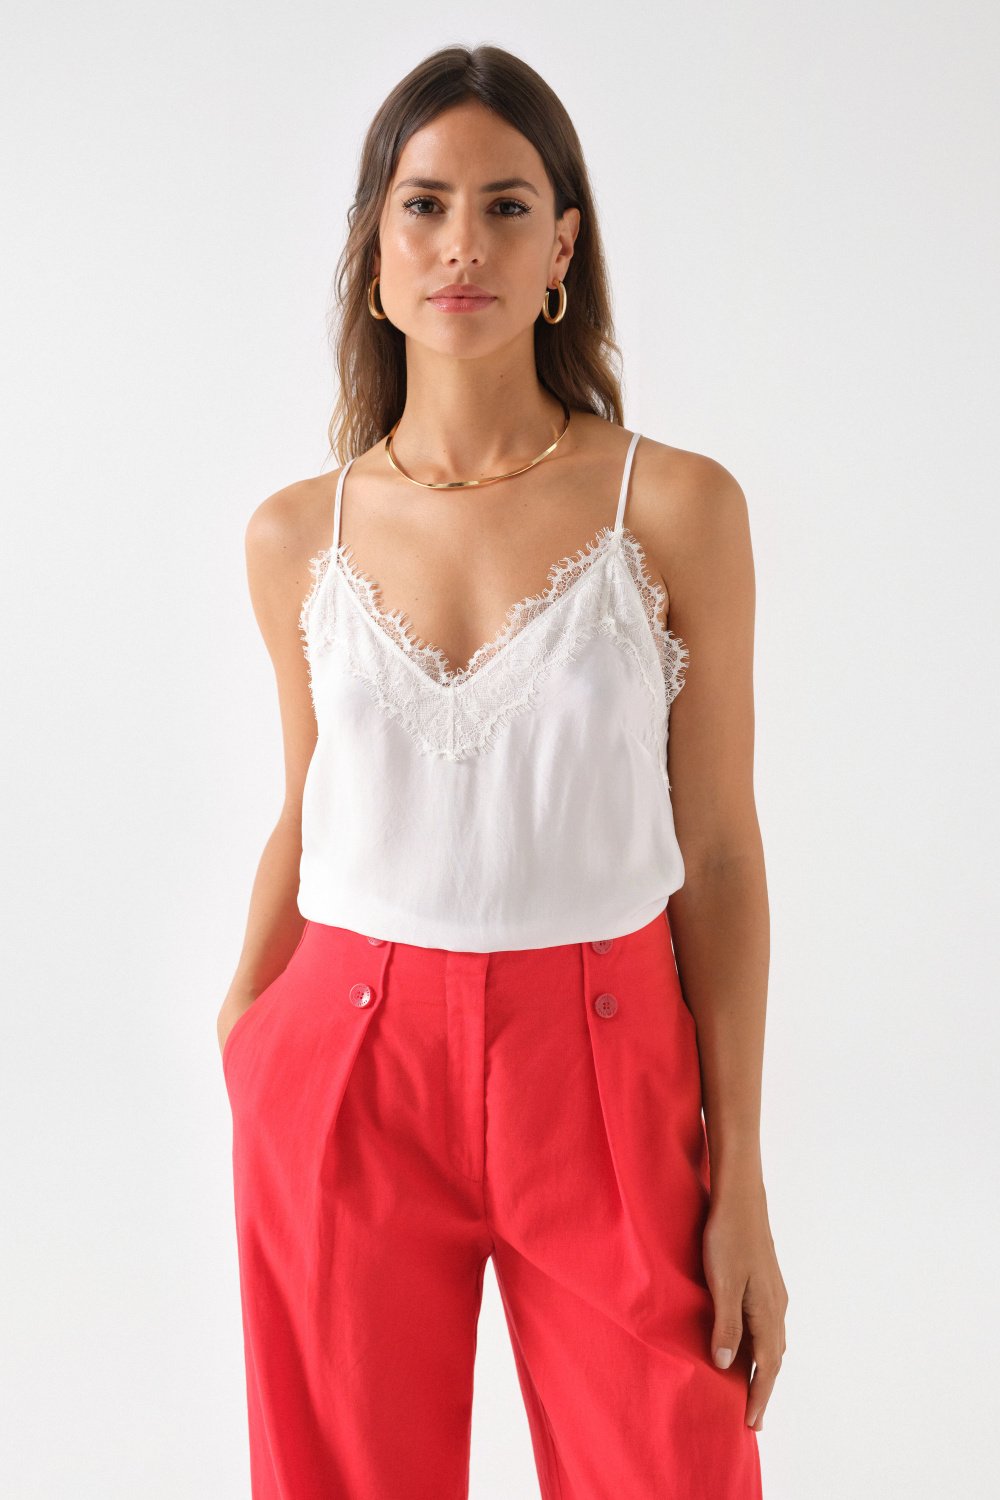 SATIN TOP WITH LACE DETAIL - Salsa